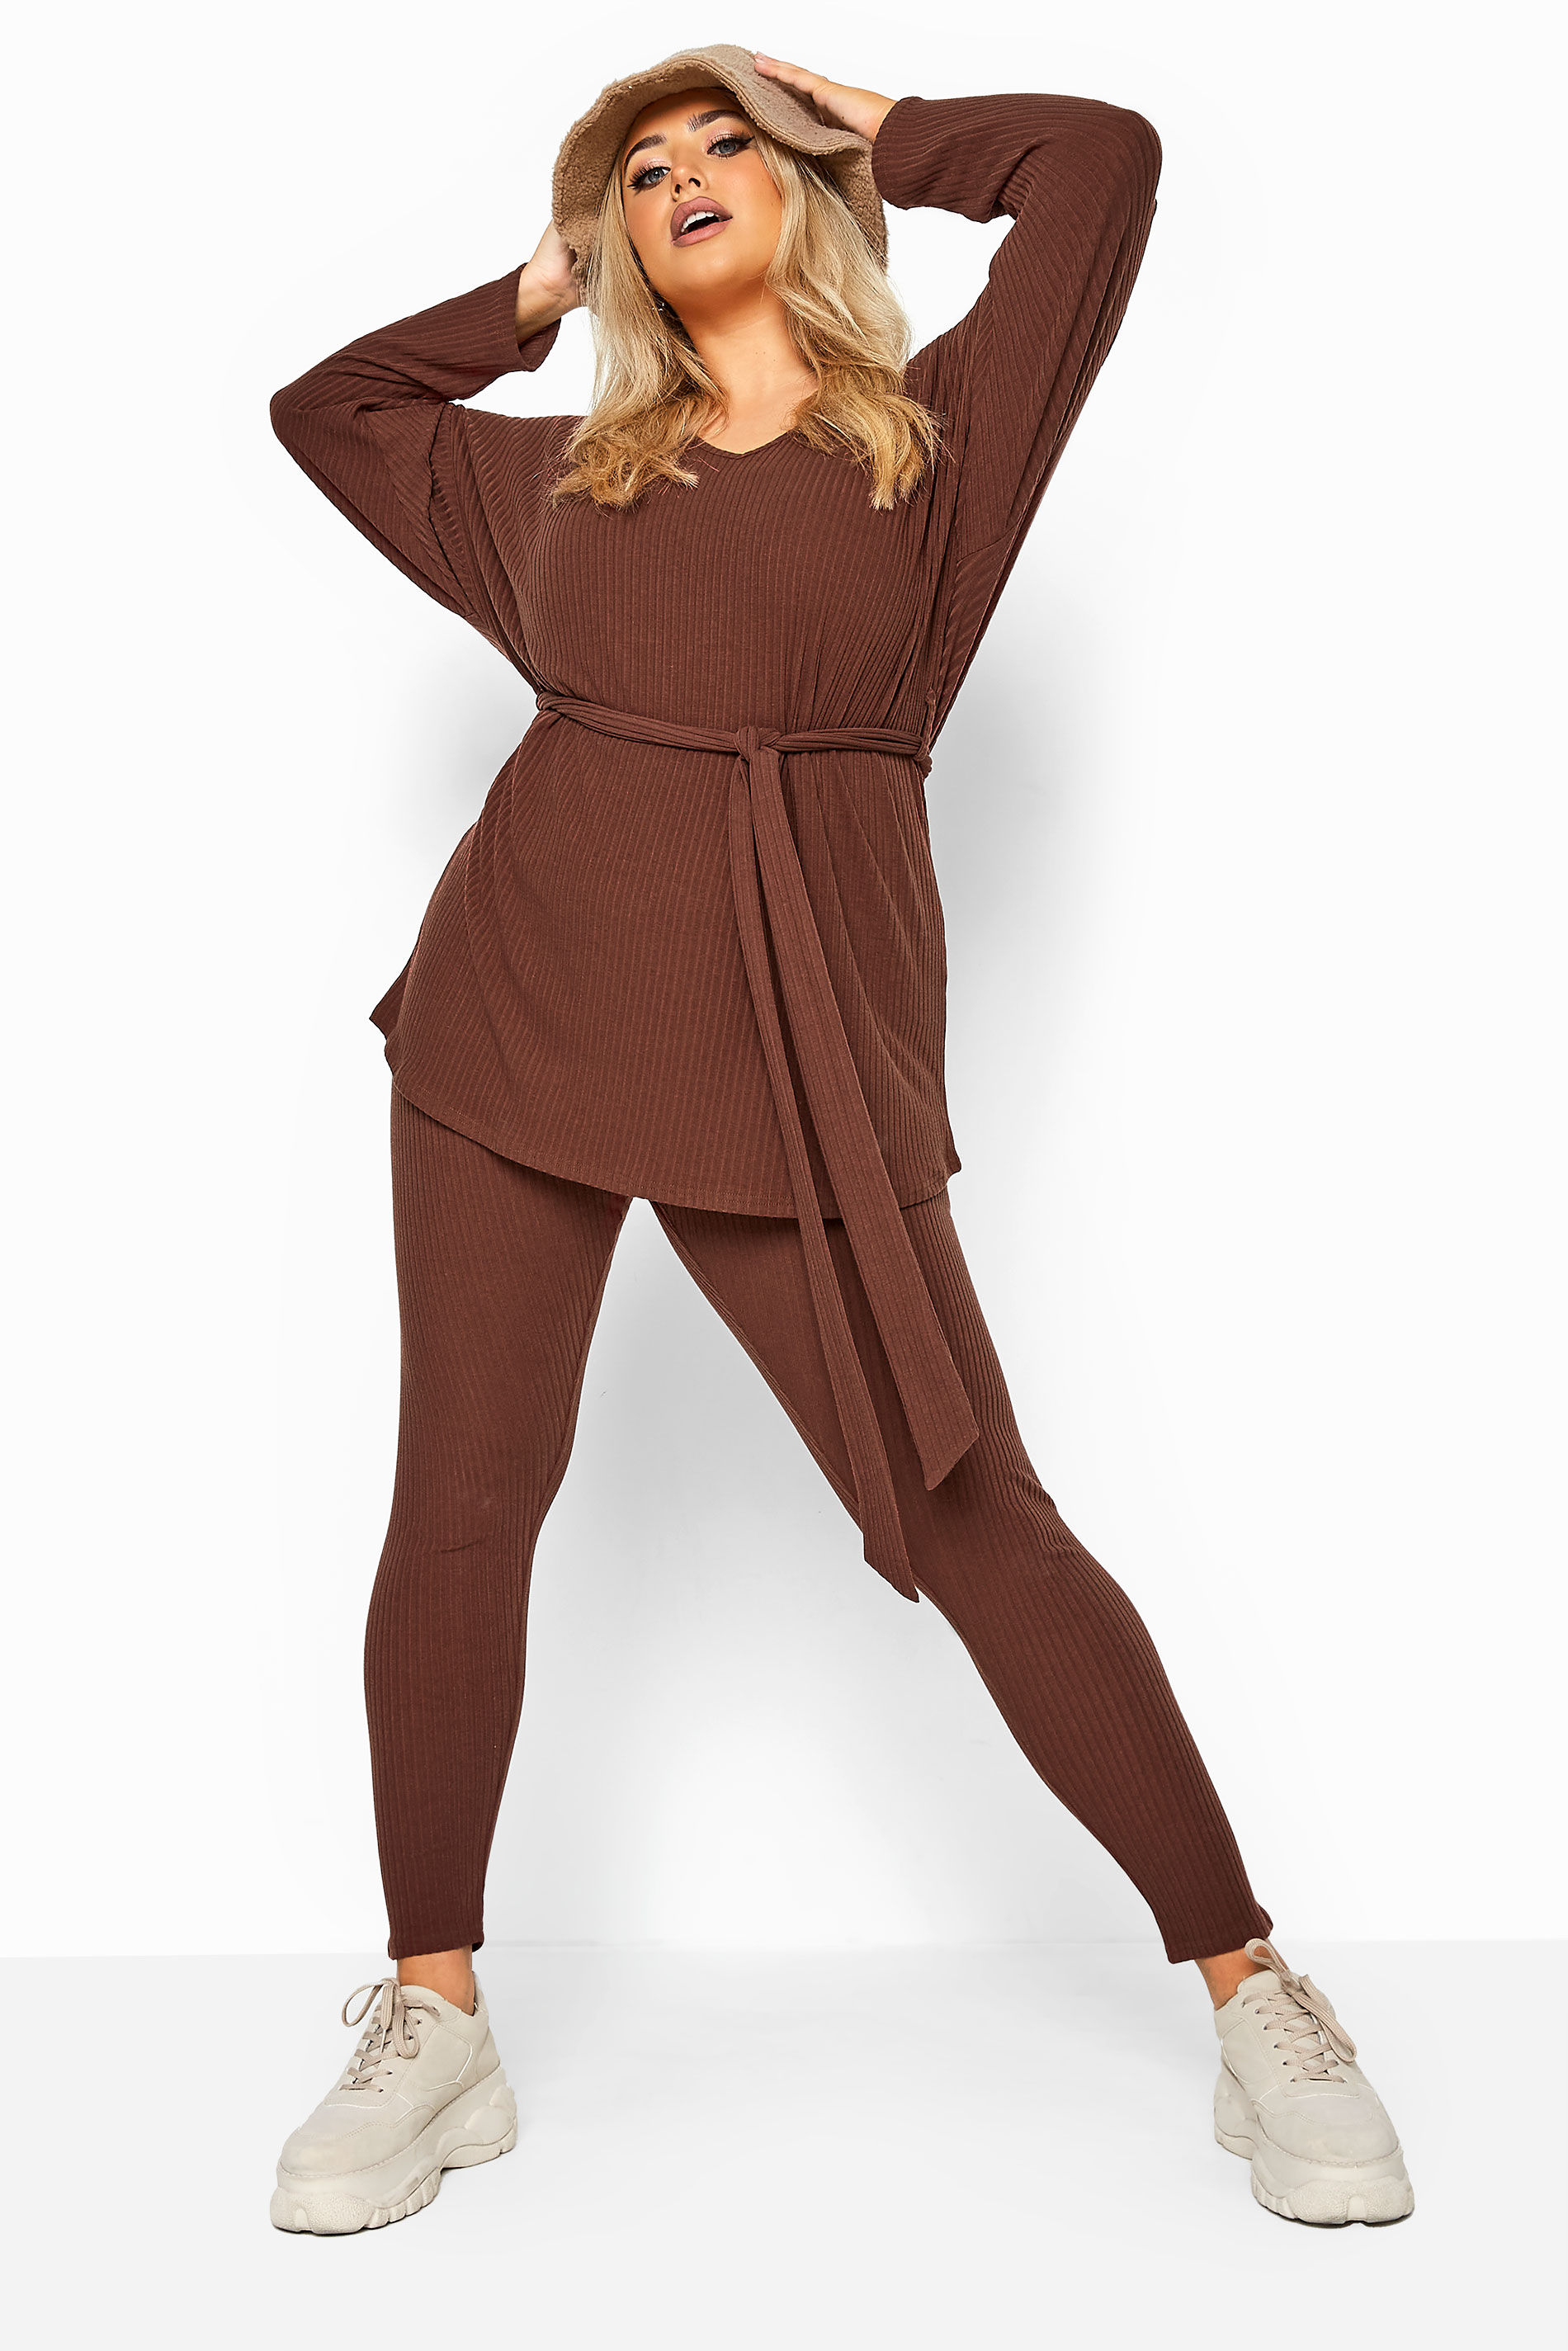 Chocolate Brown Crinkle Cut Out Hip Leggings Co-ord